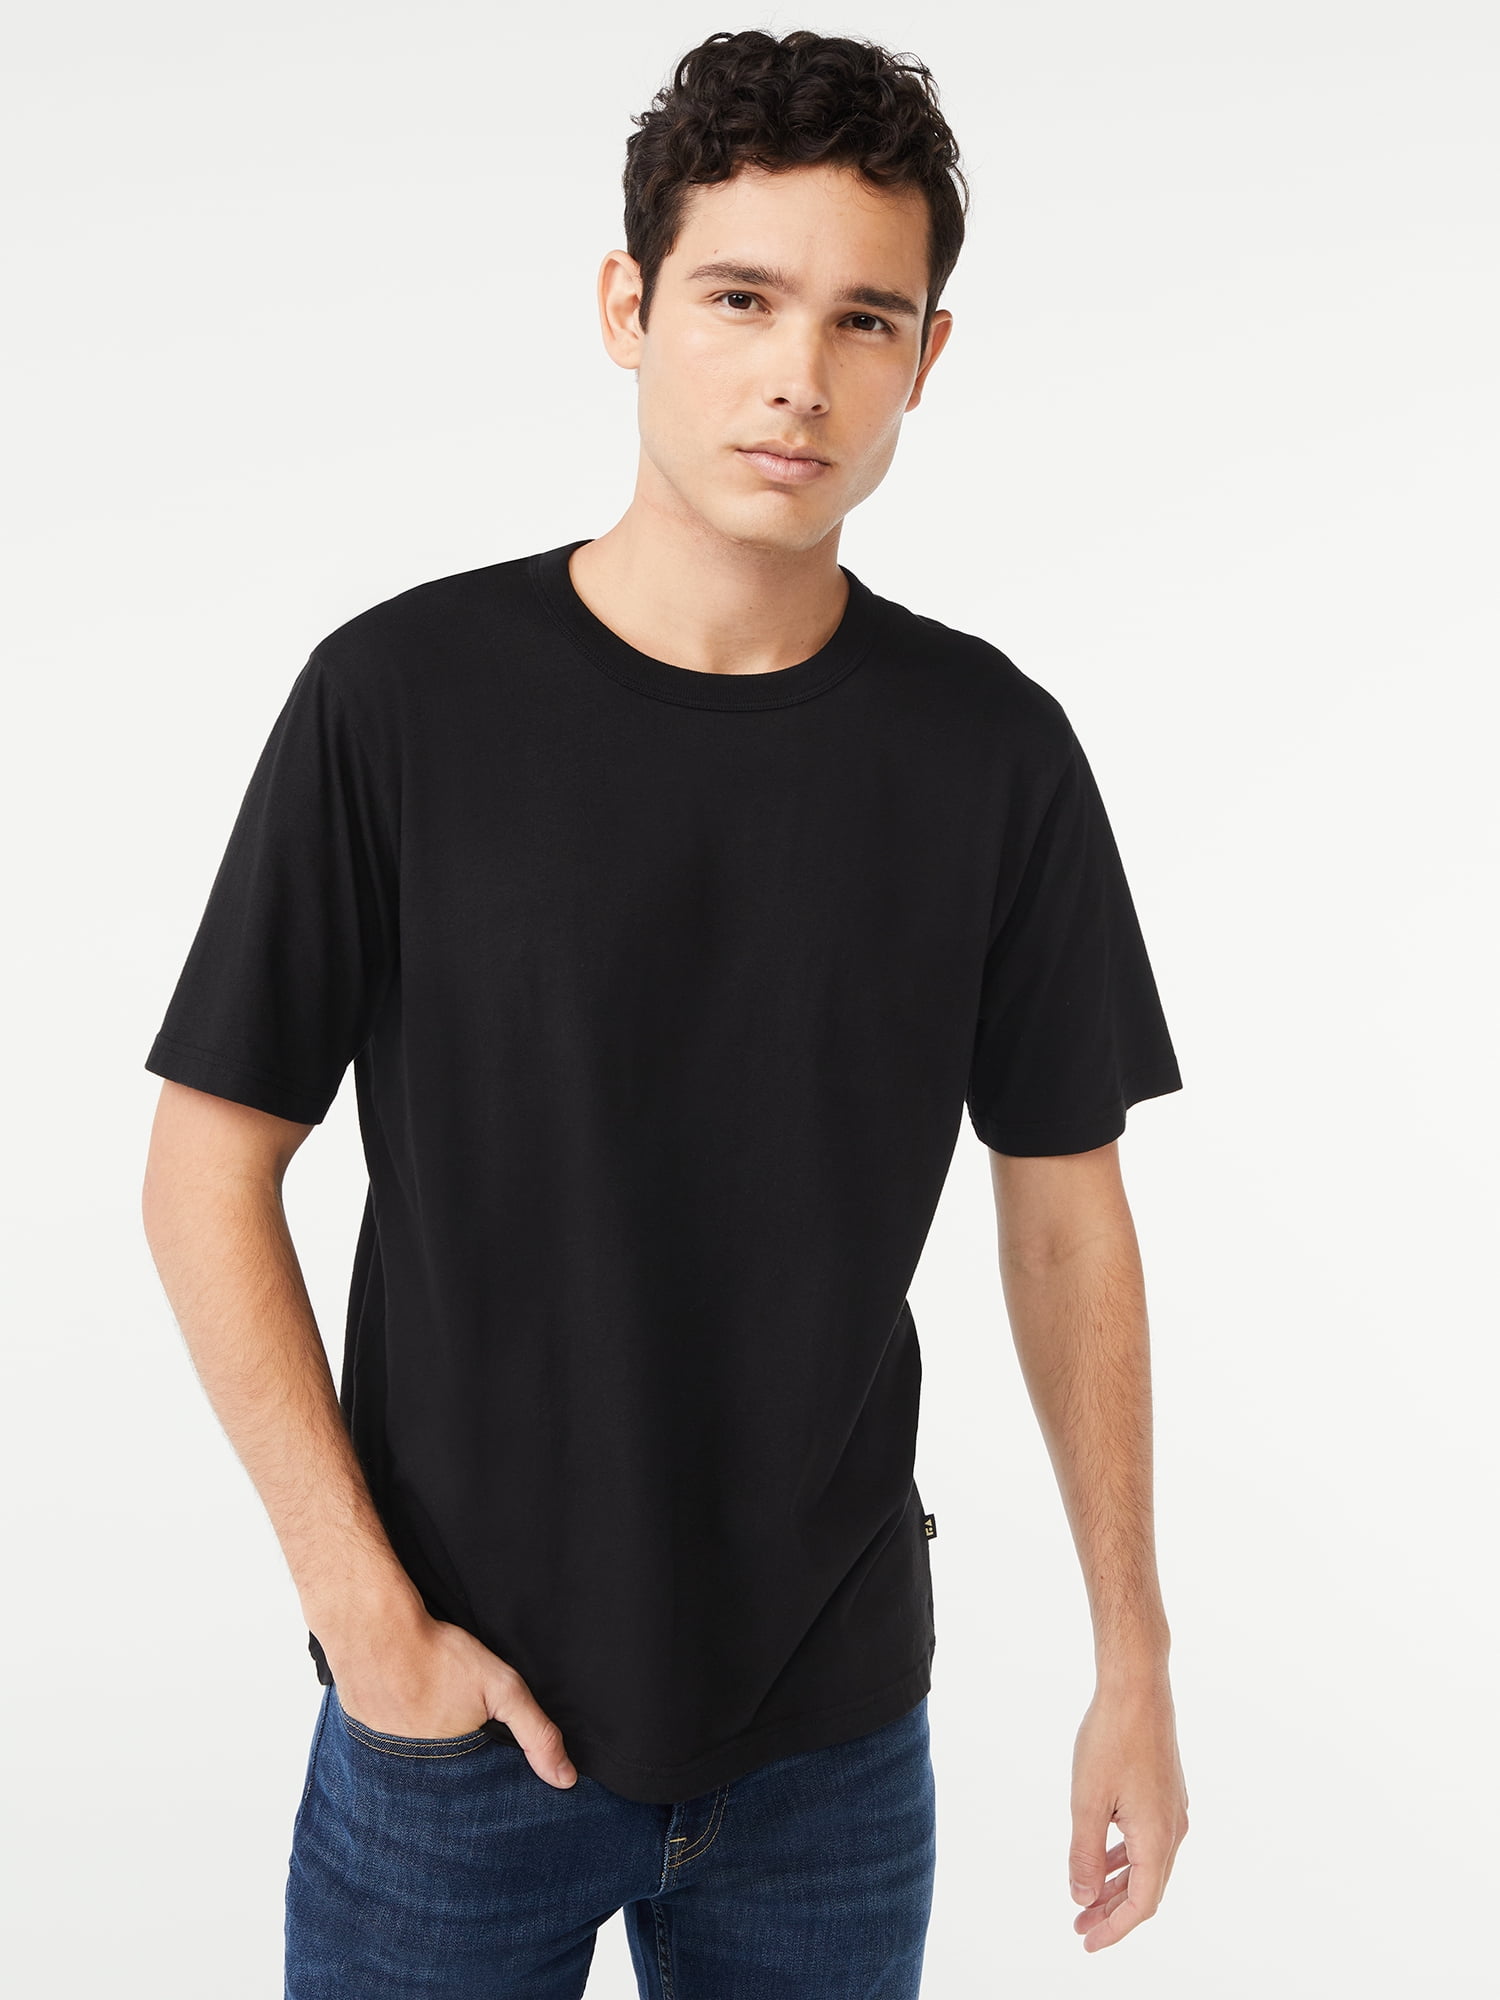 Free Assembly Men's Everyday Cotton Tee with Short Sleeves, Sizes S-3XL ...